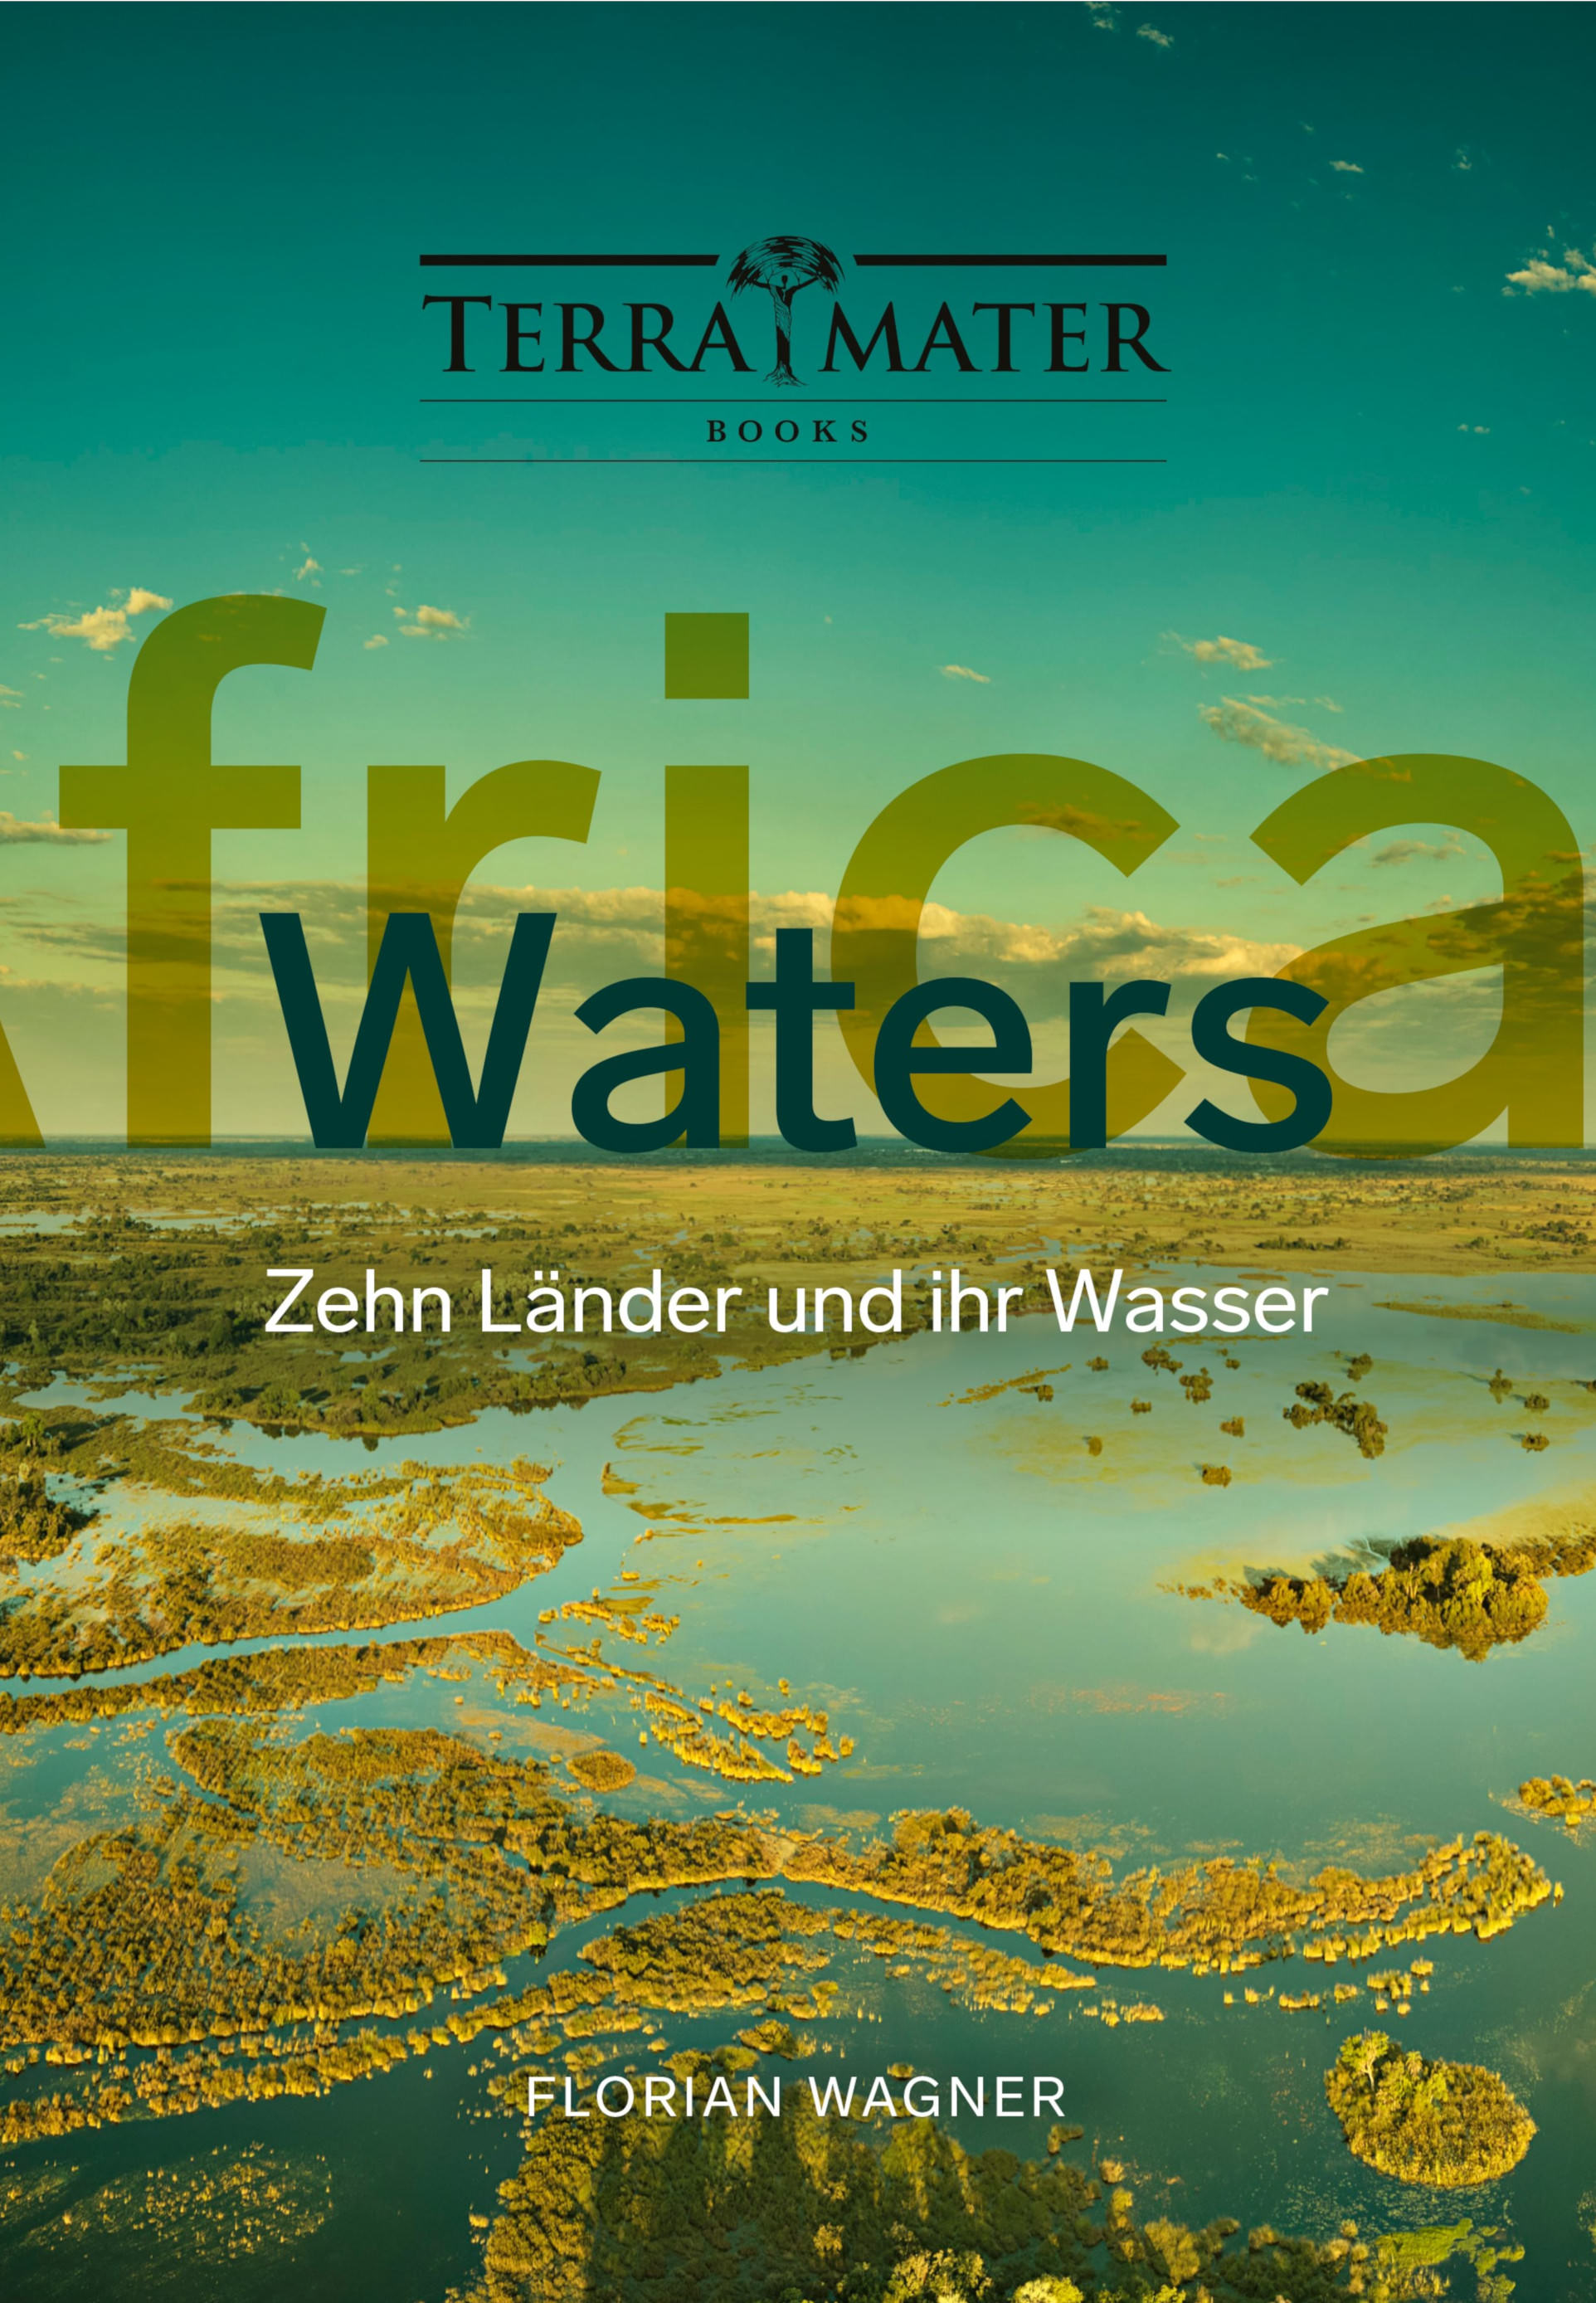 Florian Wagner: African Waters